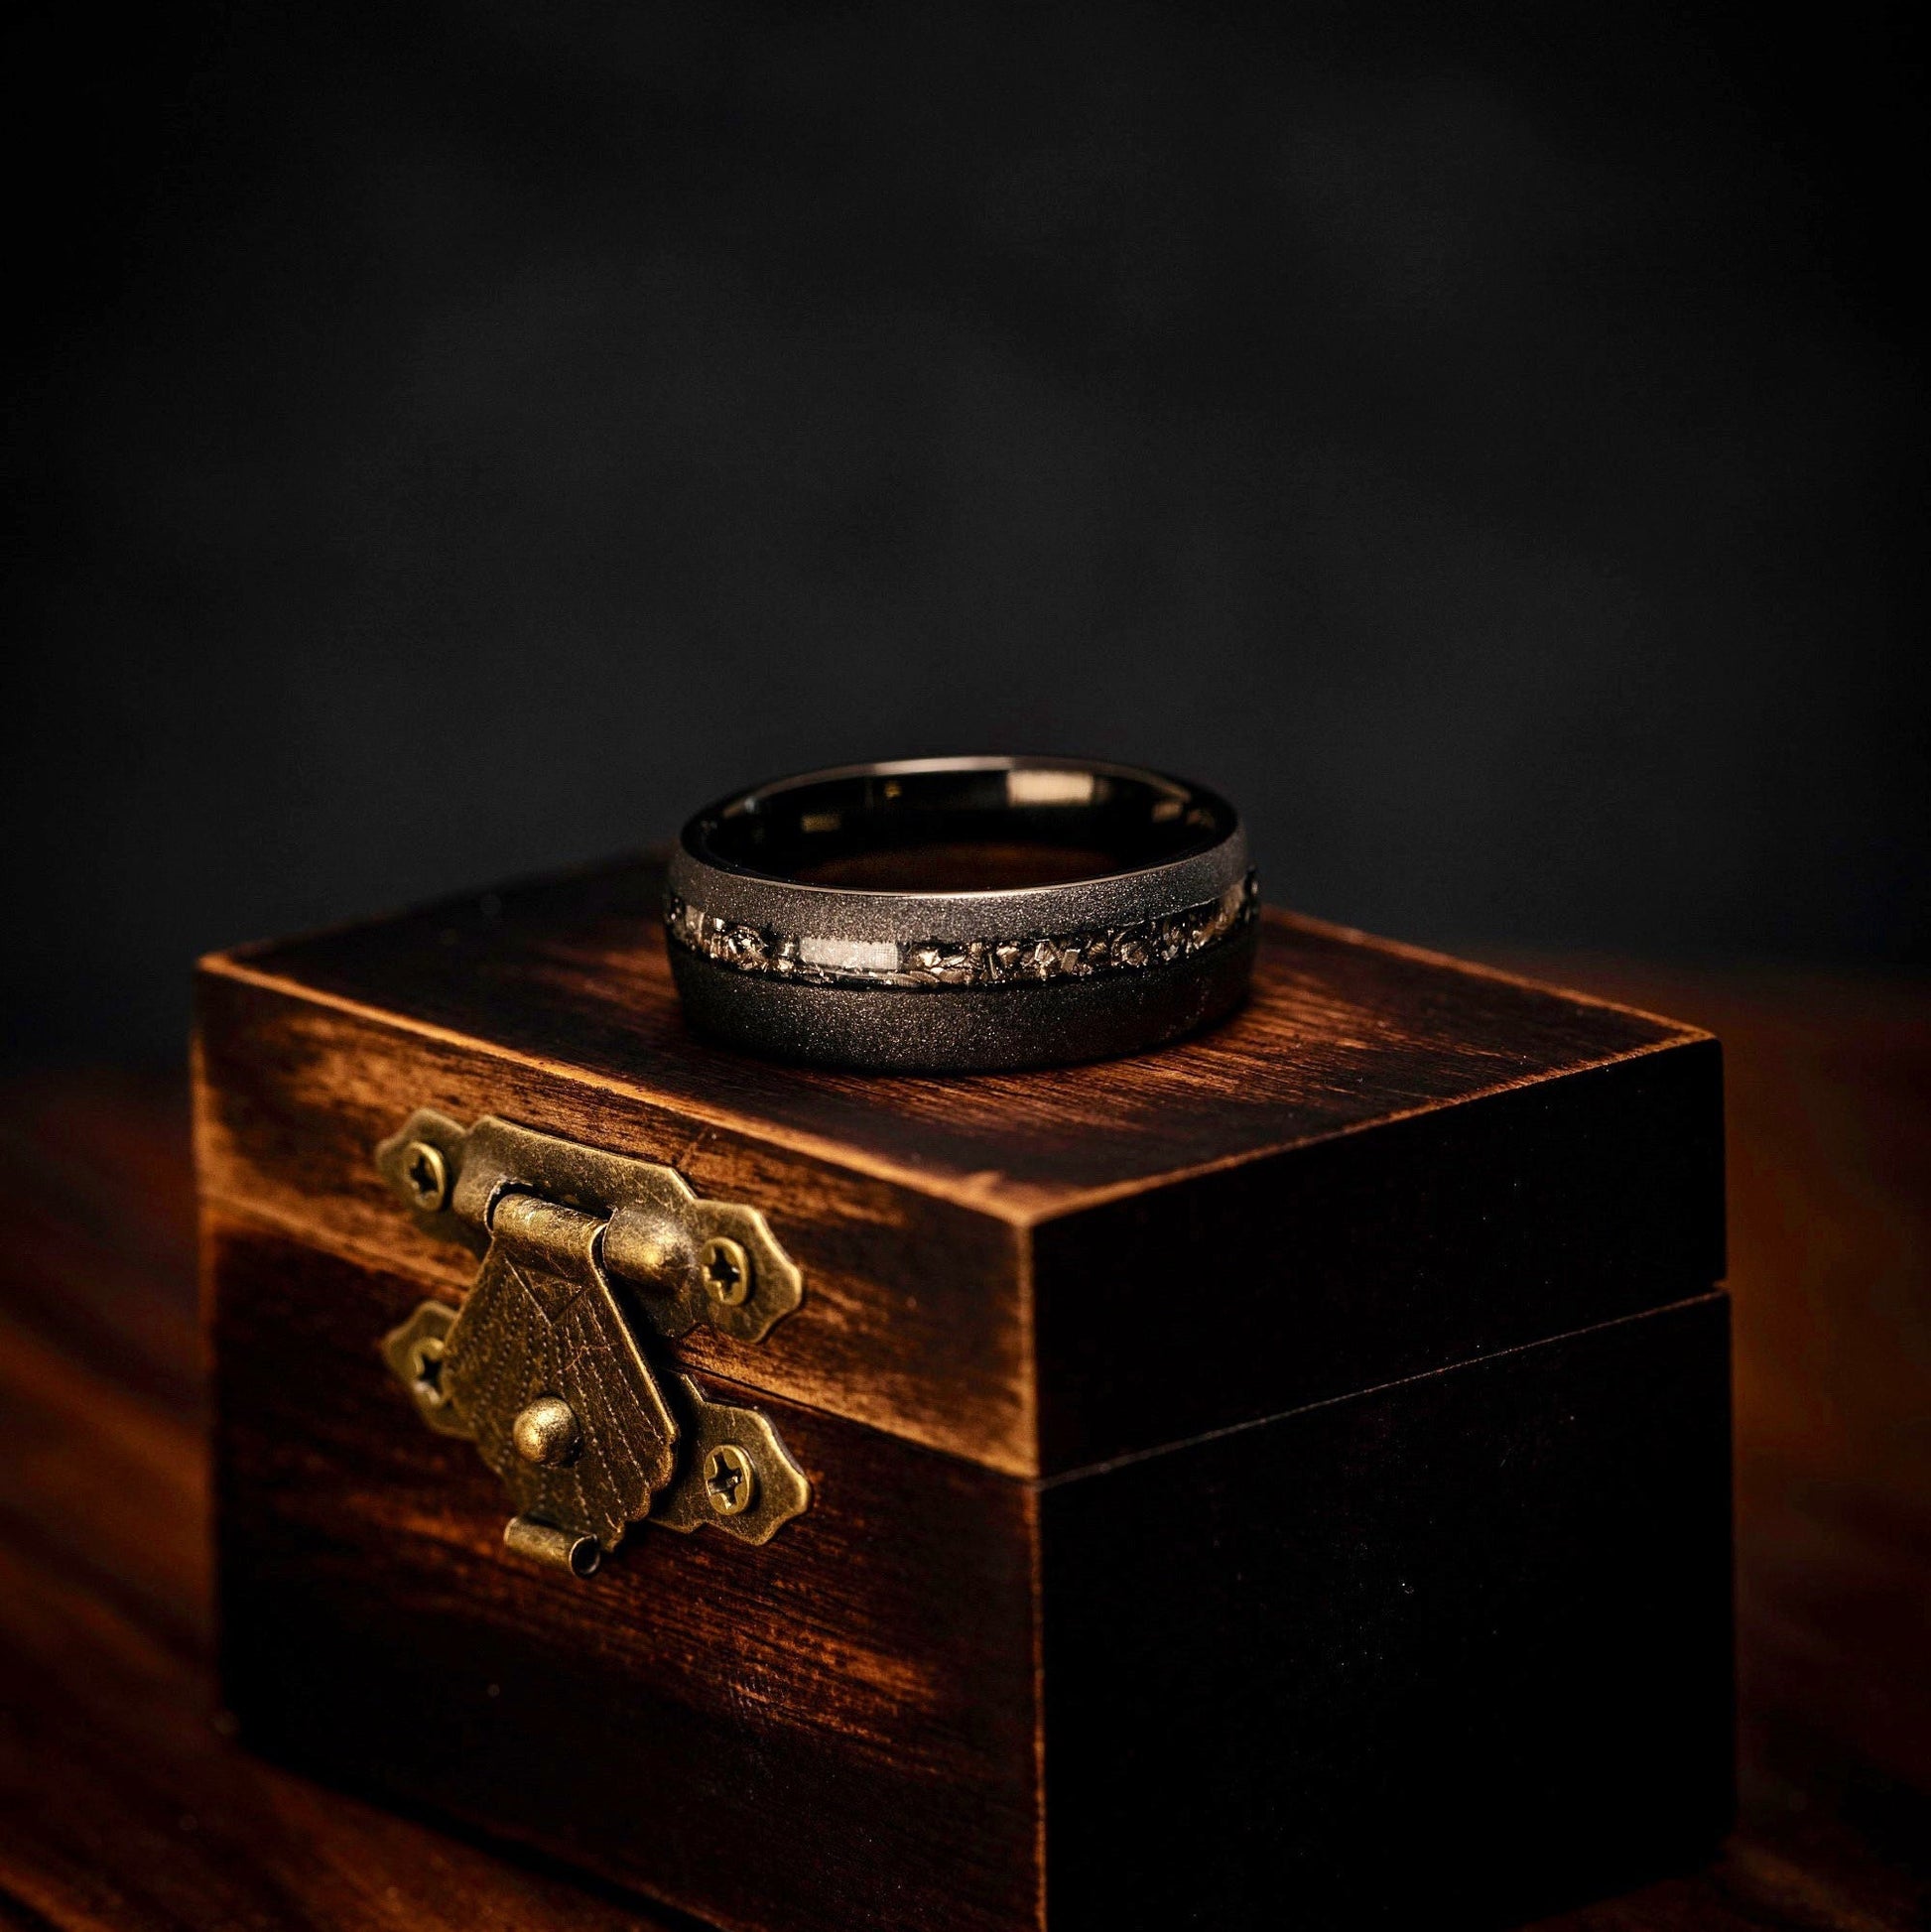 Contemporary black wedding band with meteorite detailing and sandblasted texture.